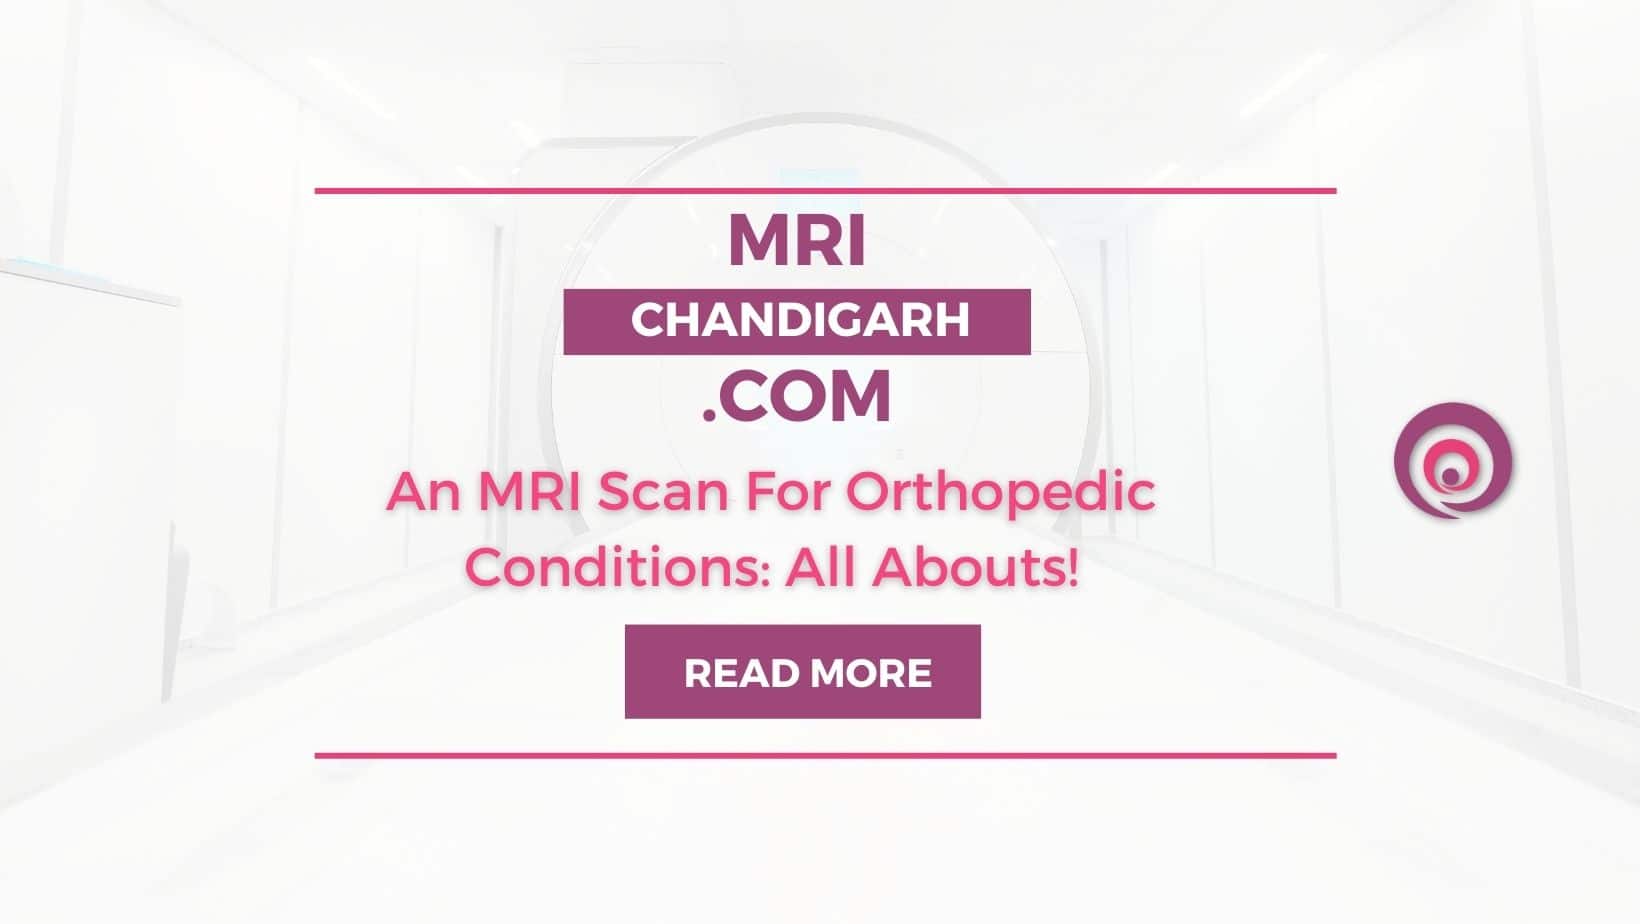 An MRI Scan For Orthopedic Conditions: All Abouts!